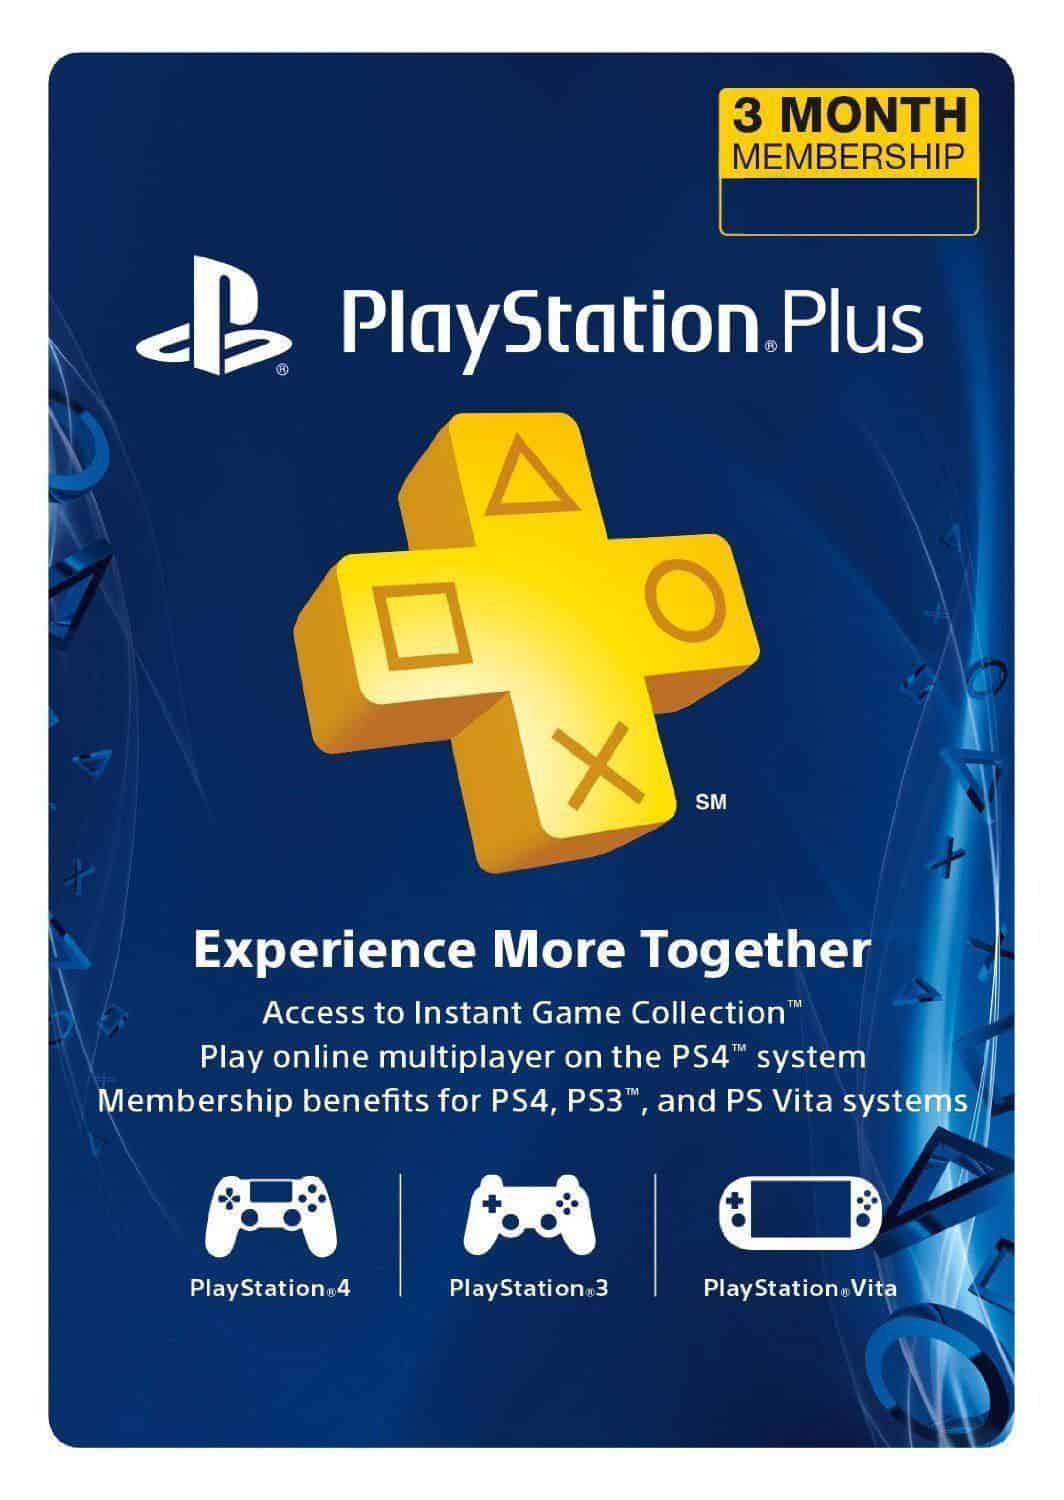 PlayStation Plus Price Increase is too much! 